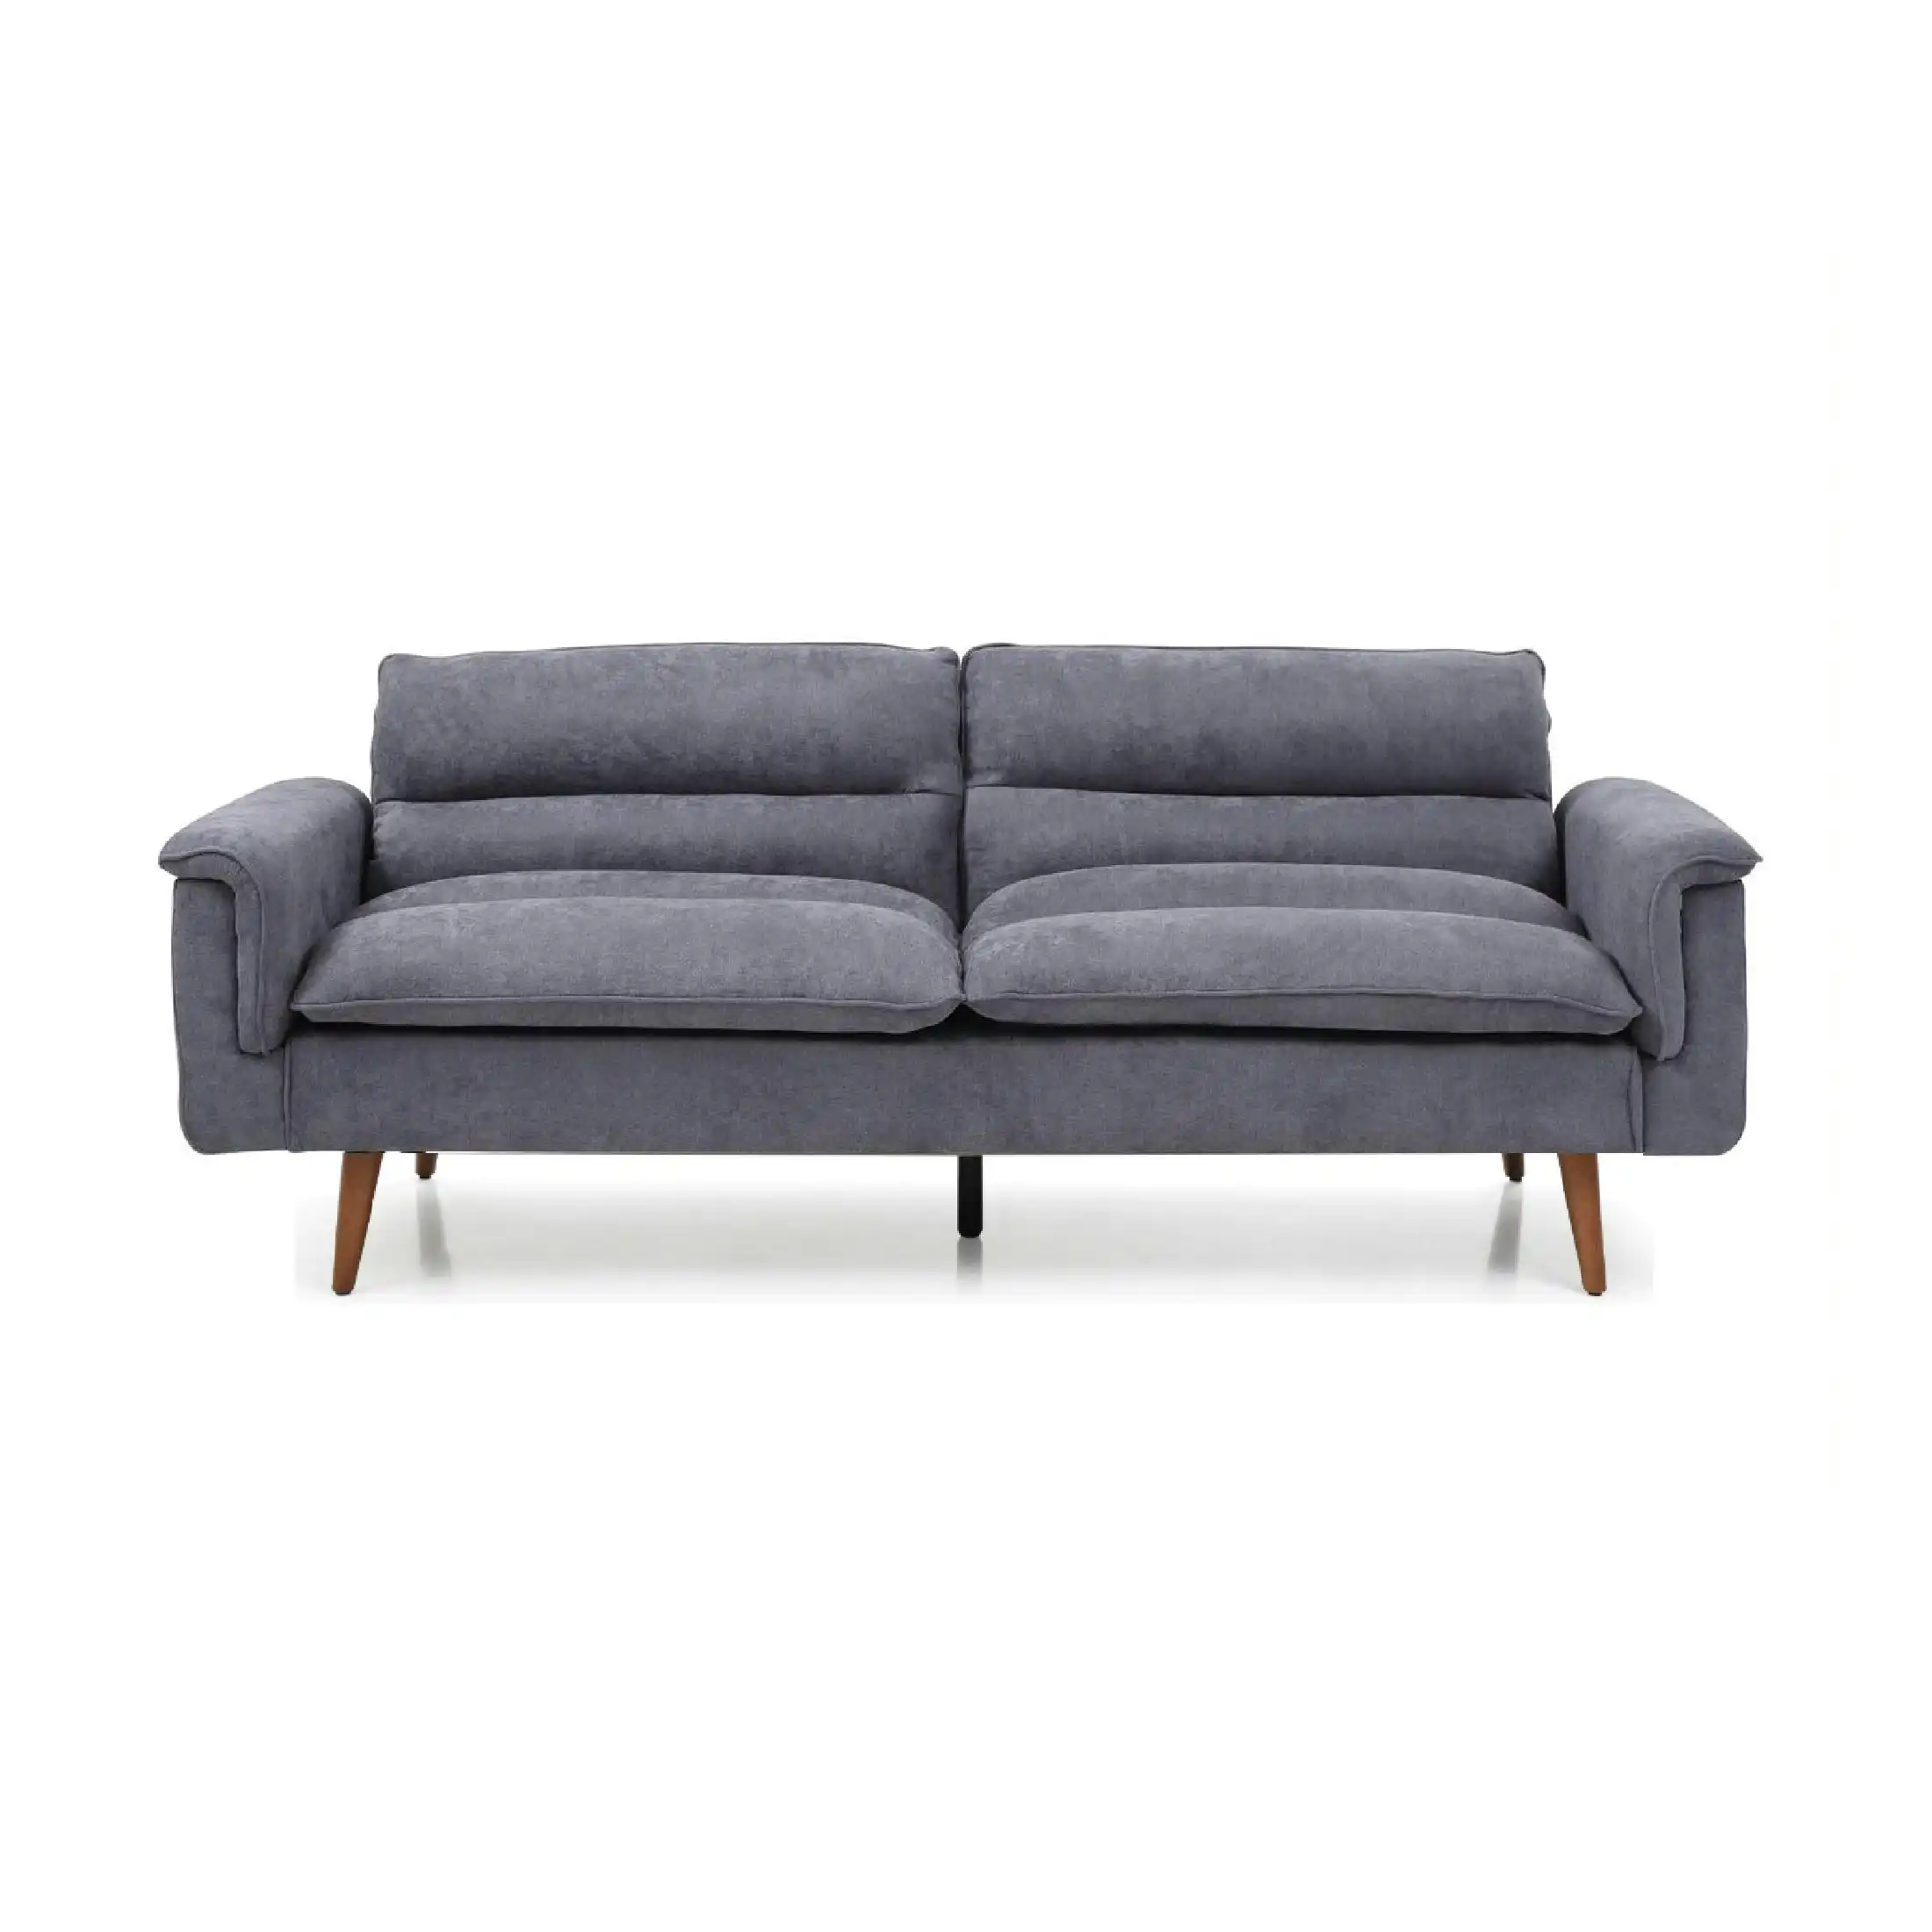 Archie Sofa bed Blue